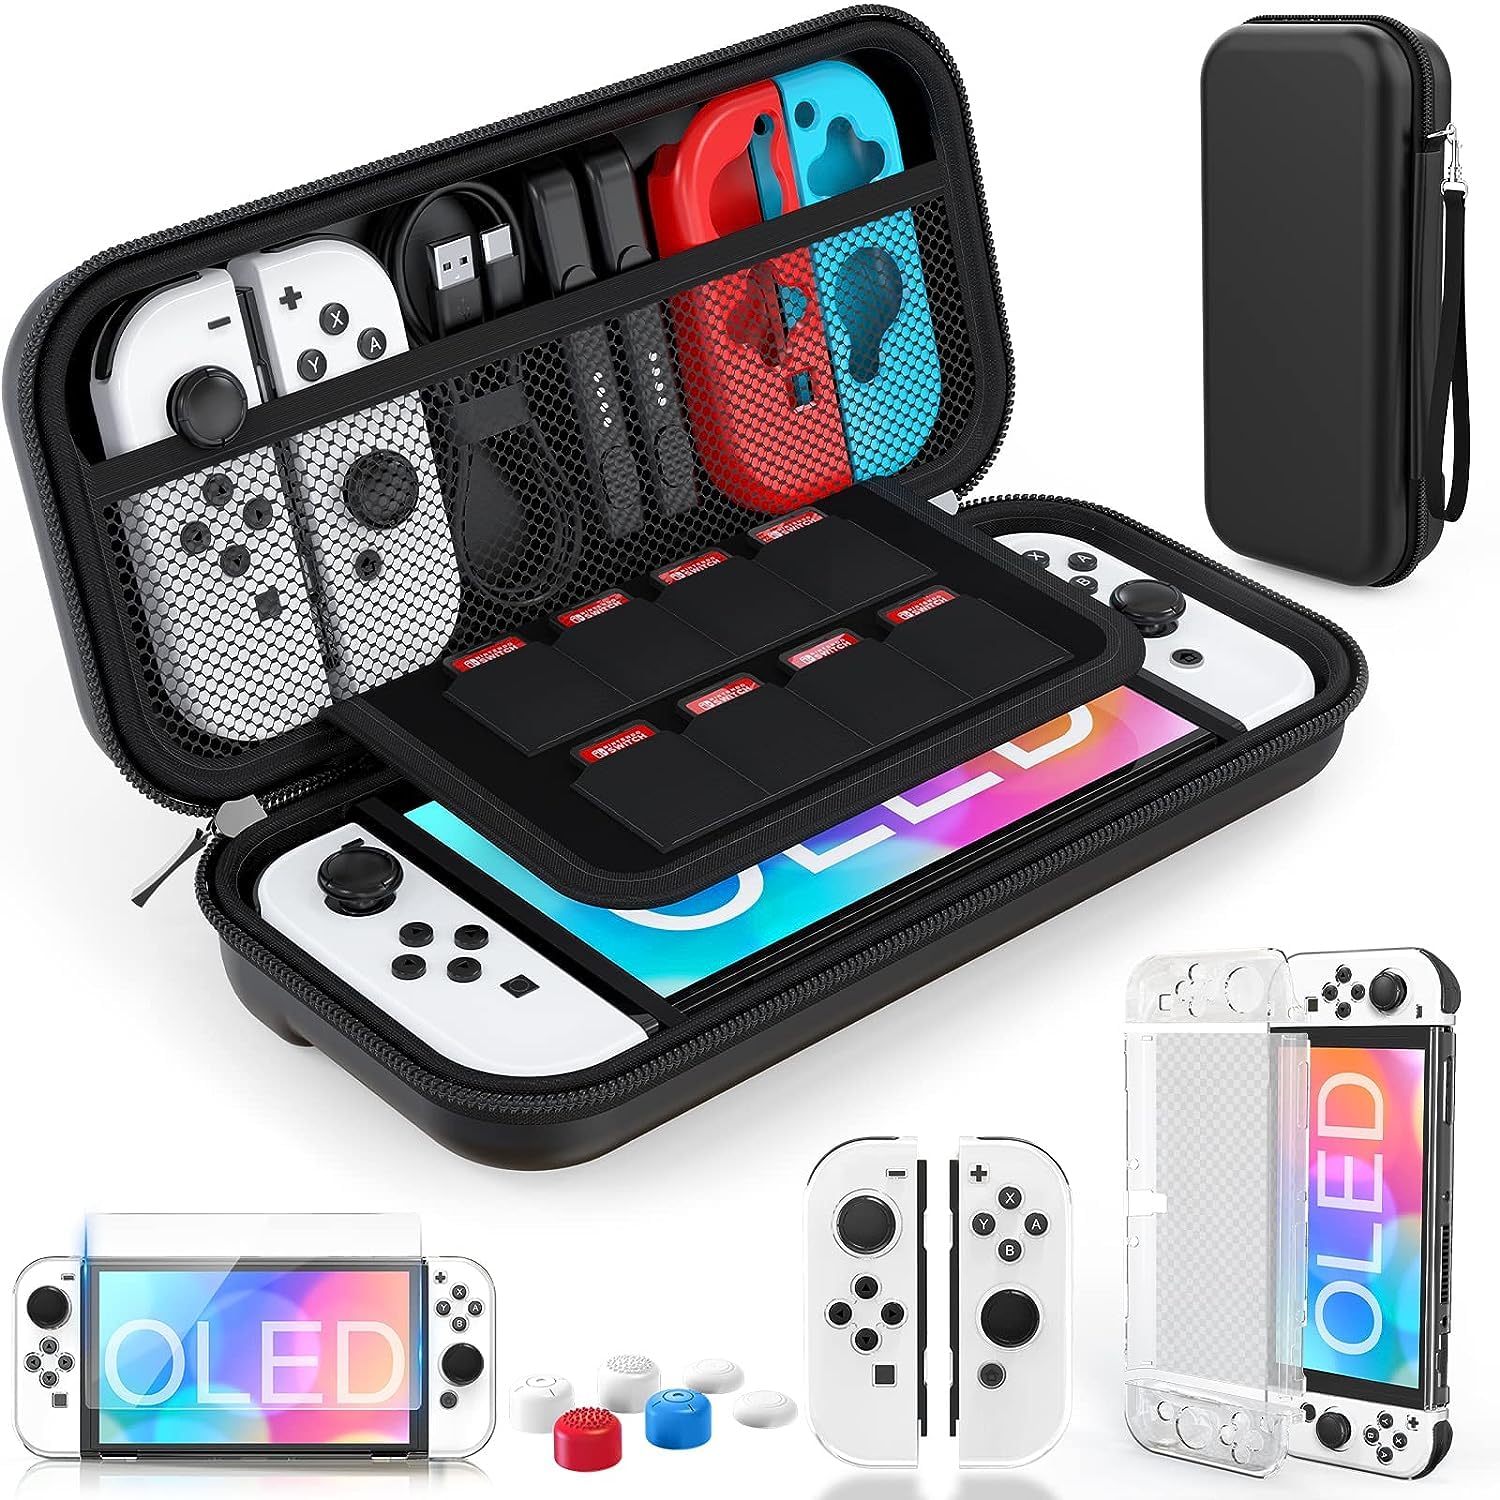 16 X HEYSTOP SWITCH OLED CASE FOR NINTENDO SWITCH OLED CARRY CASE POUCH ACCESSORIES WITH SWITCH OLED CLEAR COVER CASE TEMPERD GLASS SCREEN PROTECTOR AND 6 THUMB GRIPS CAPS FOR NINTENDO SWITCH OLED MO